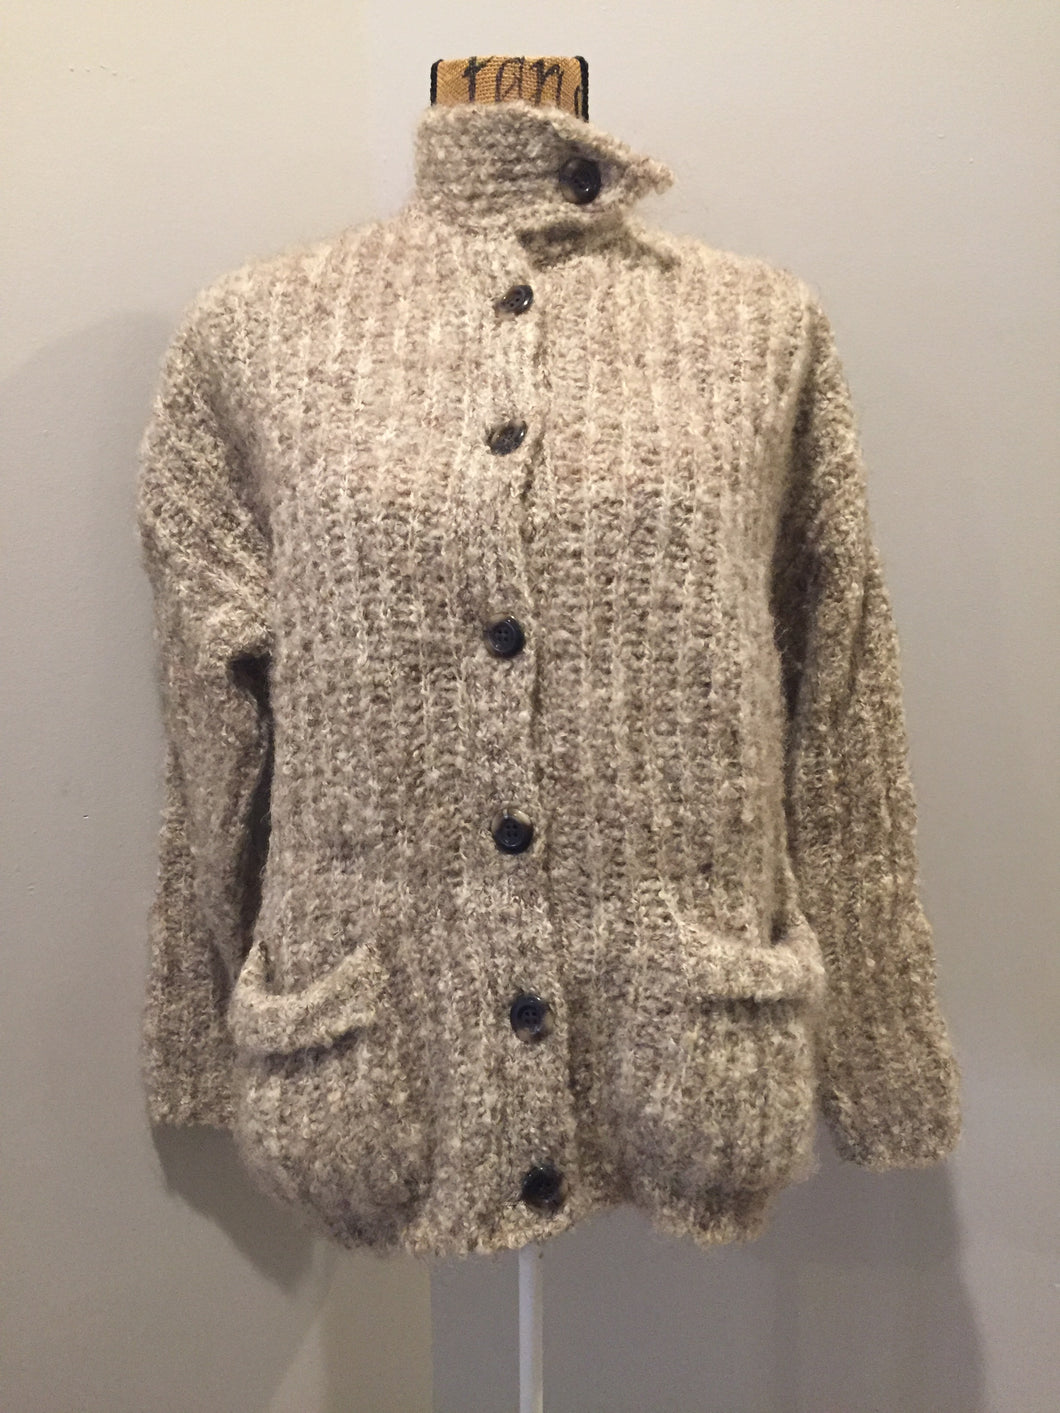 Kingspier Vintage - Mr. Poodle undyed pure wool cardigan with button closures, patch pockets and unique collar. Made in Yarmouth, Nova Scotia. Size medium.